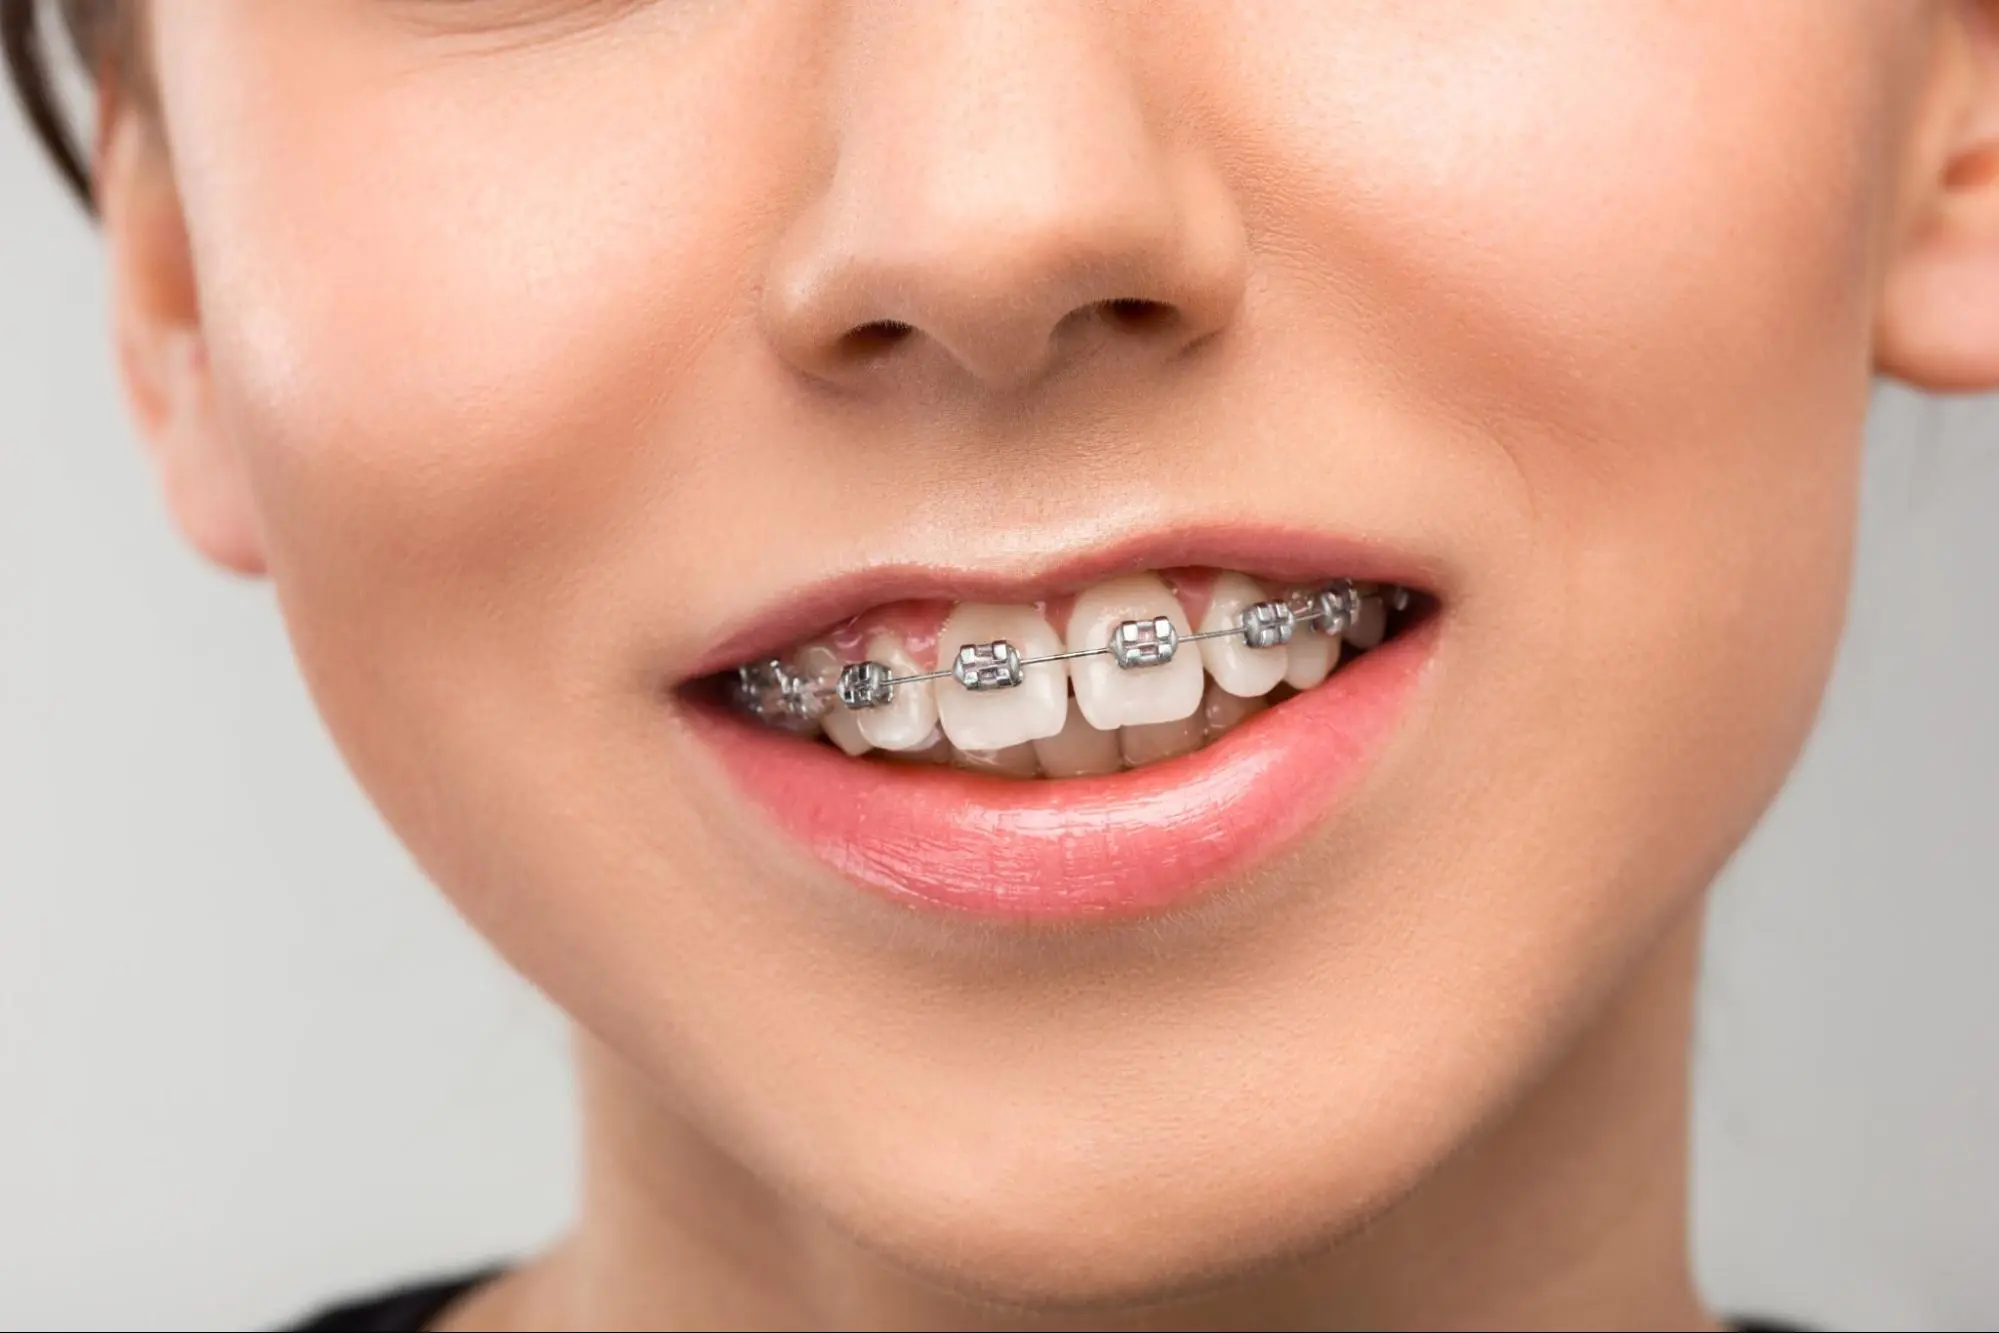 People with gaps between their teeth can get invisalign treatment